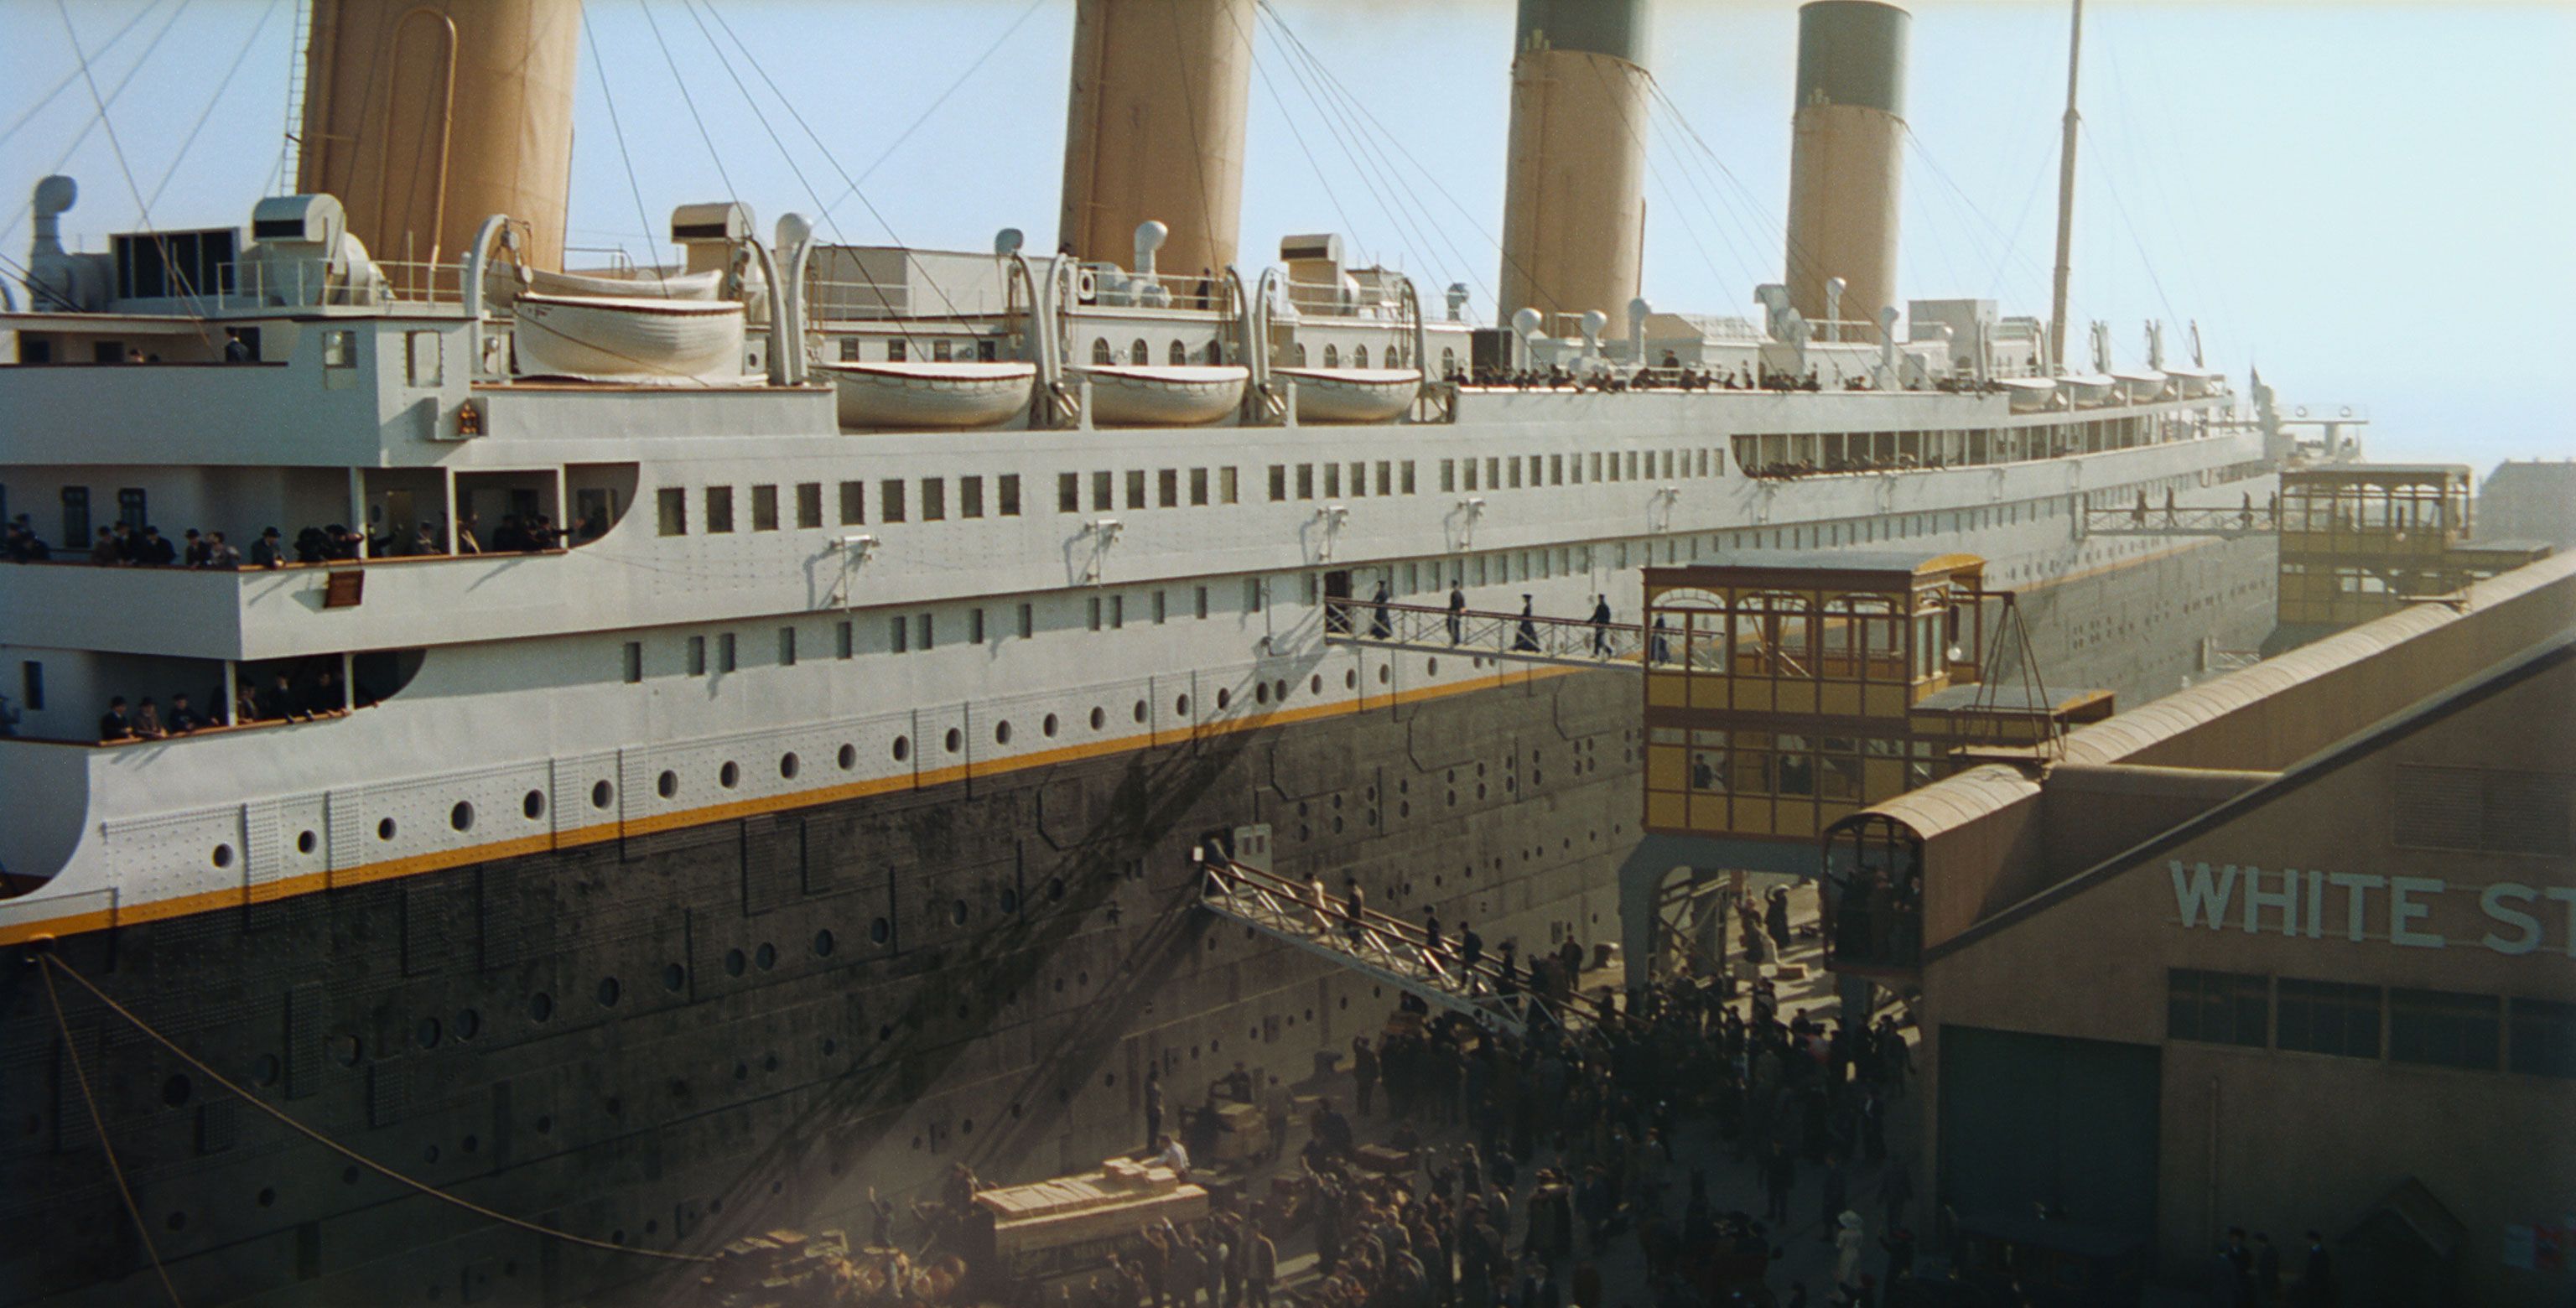 The Titanic II Ship Is Expected to Set Sail in 2022